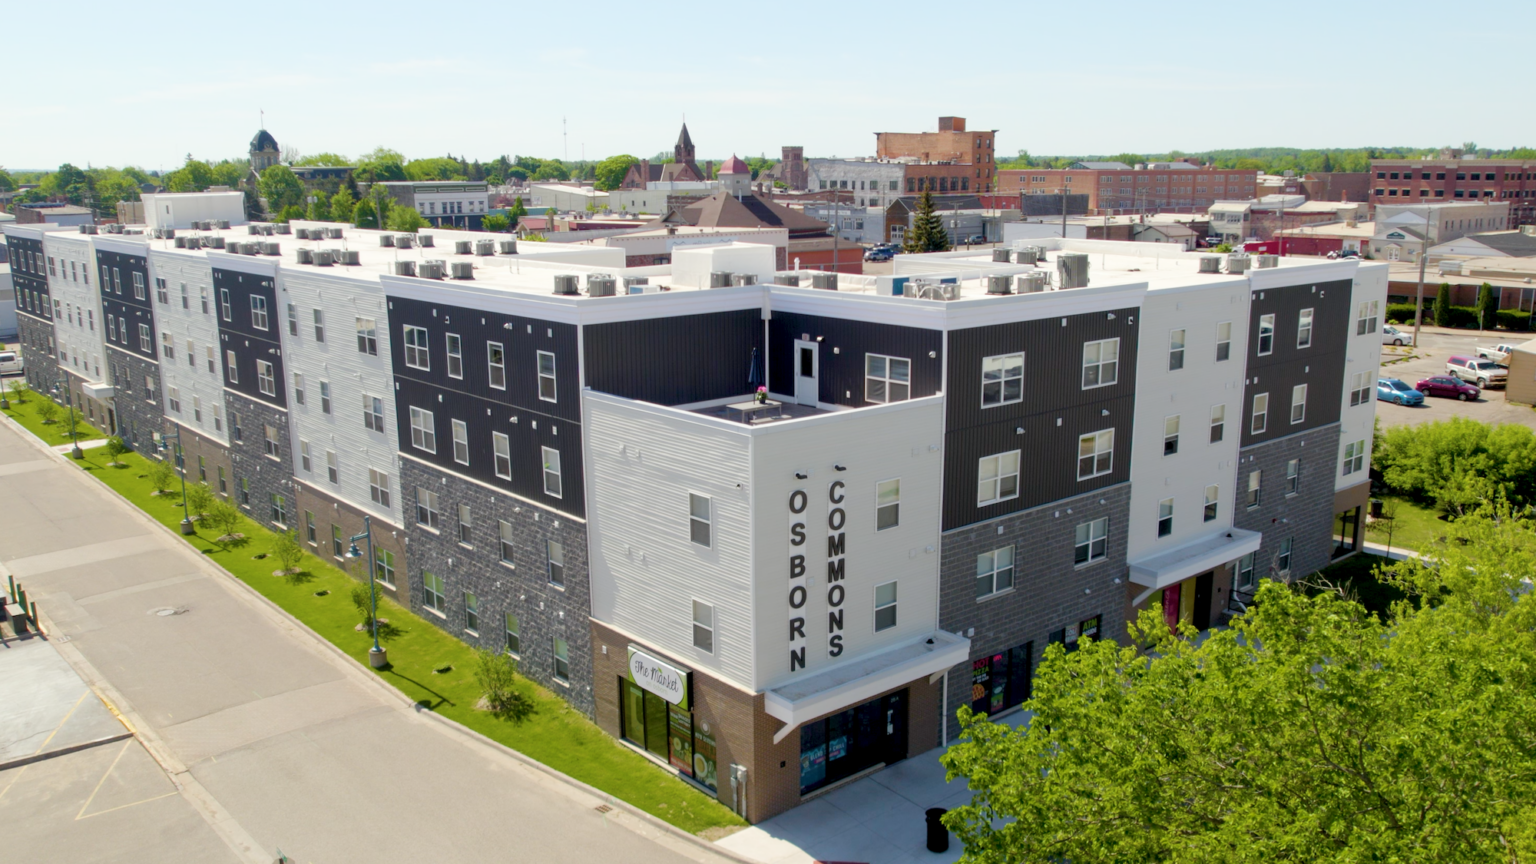 Aerial view of apartment building named Osborn Commons on a sunny day in downtown Sue Ste Marie, Michigan